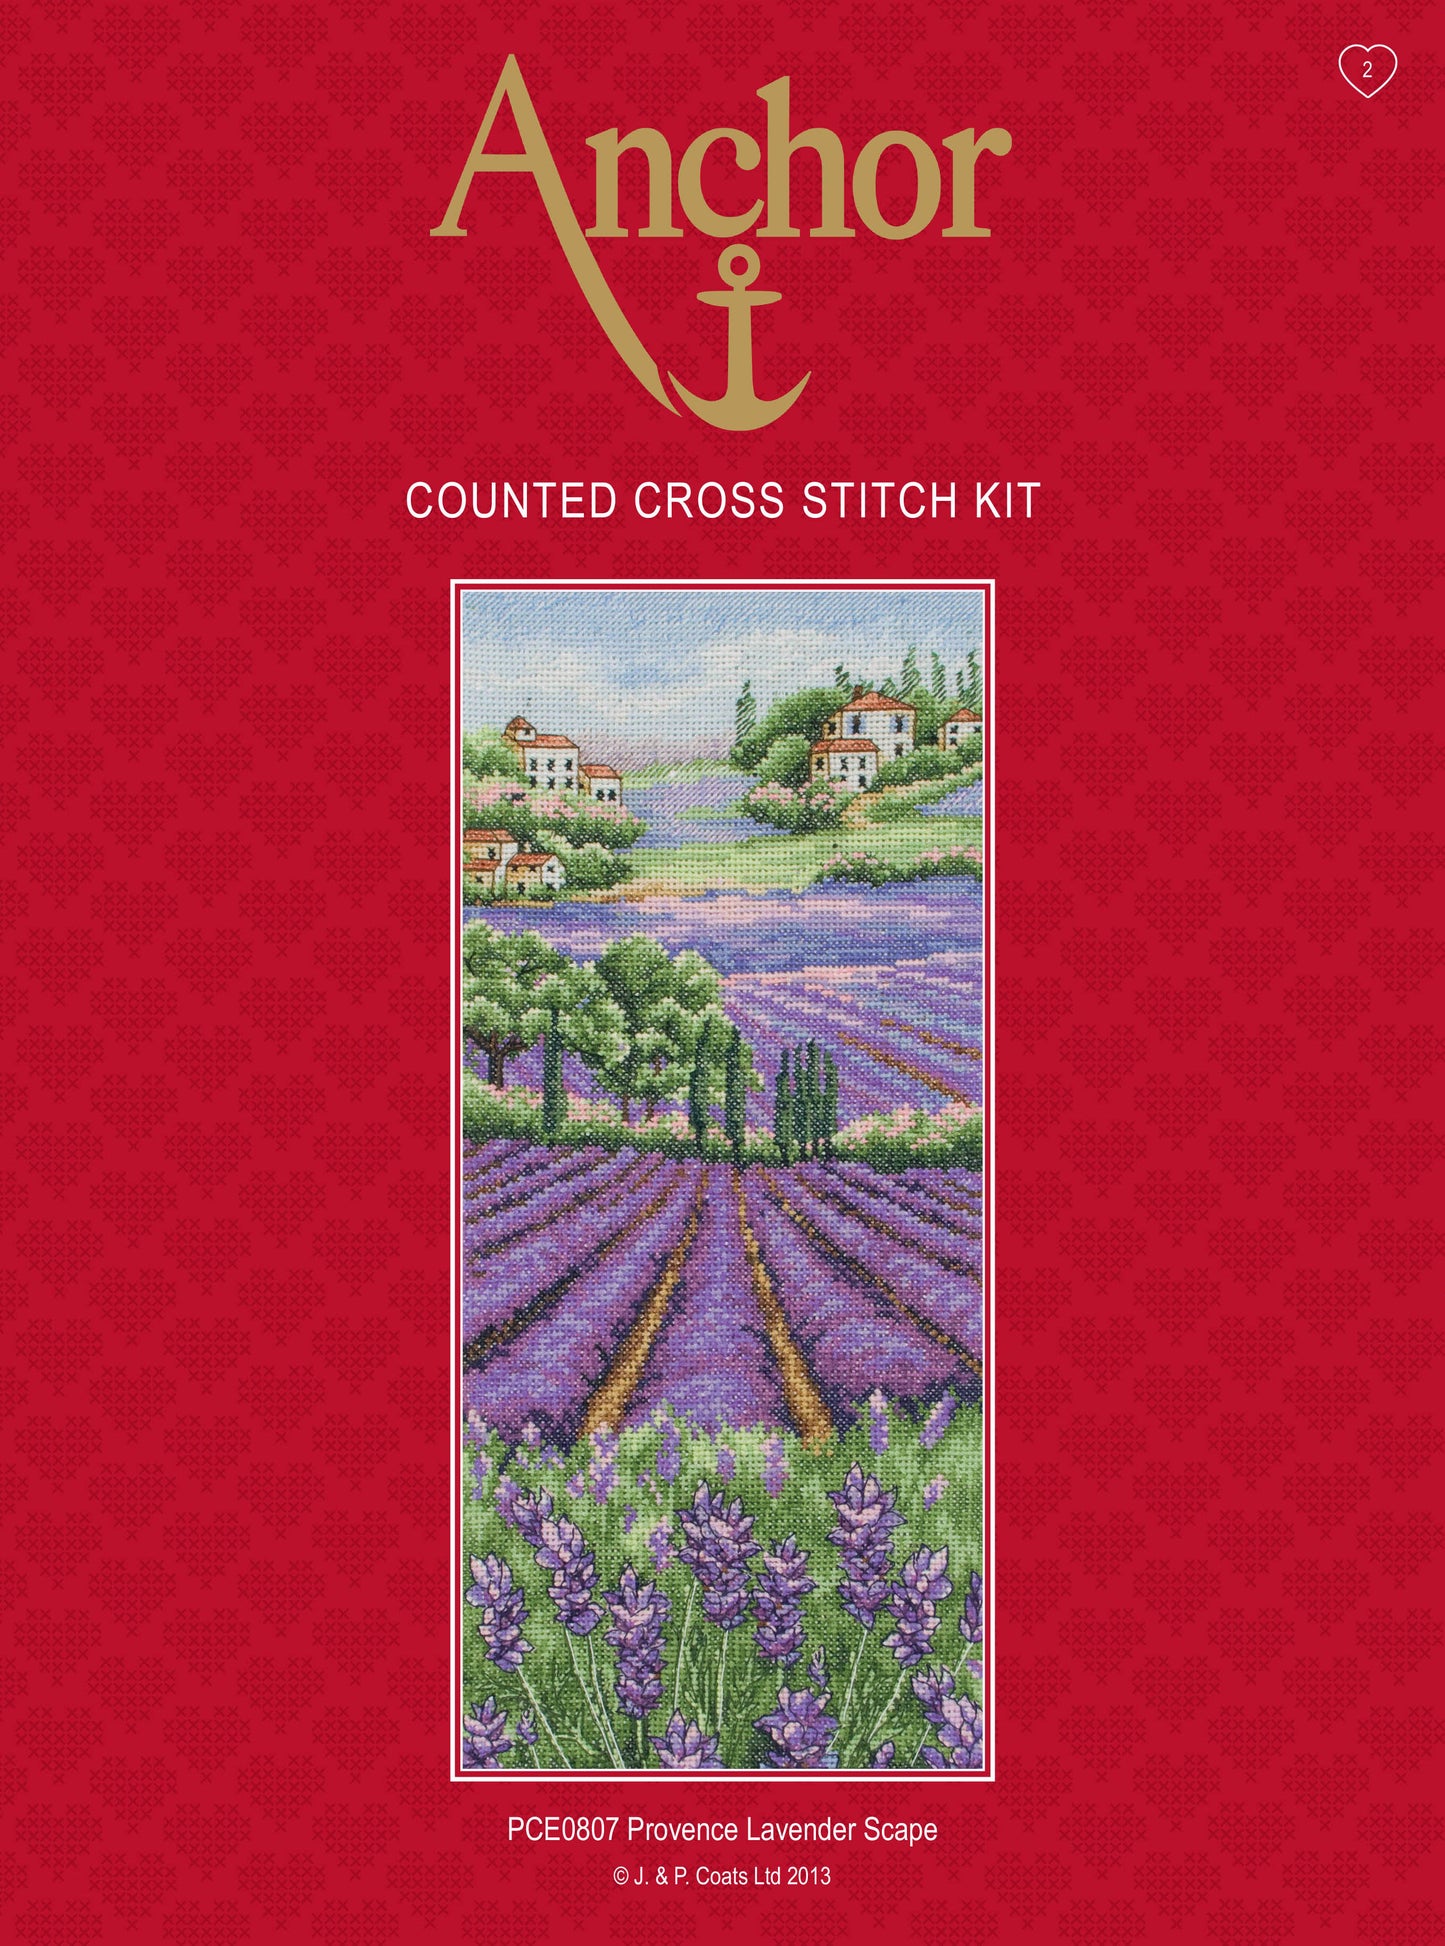 Anchor Counted Cross Stitch Kit Provence Lavender Scape